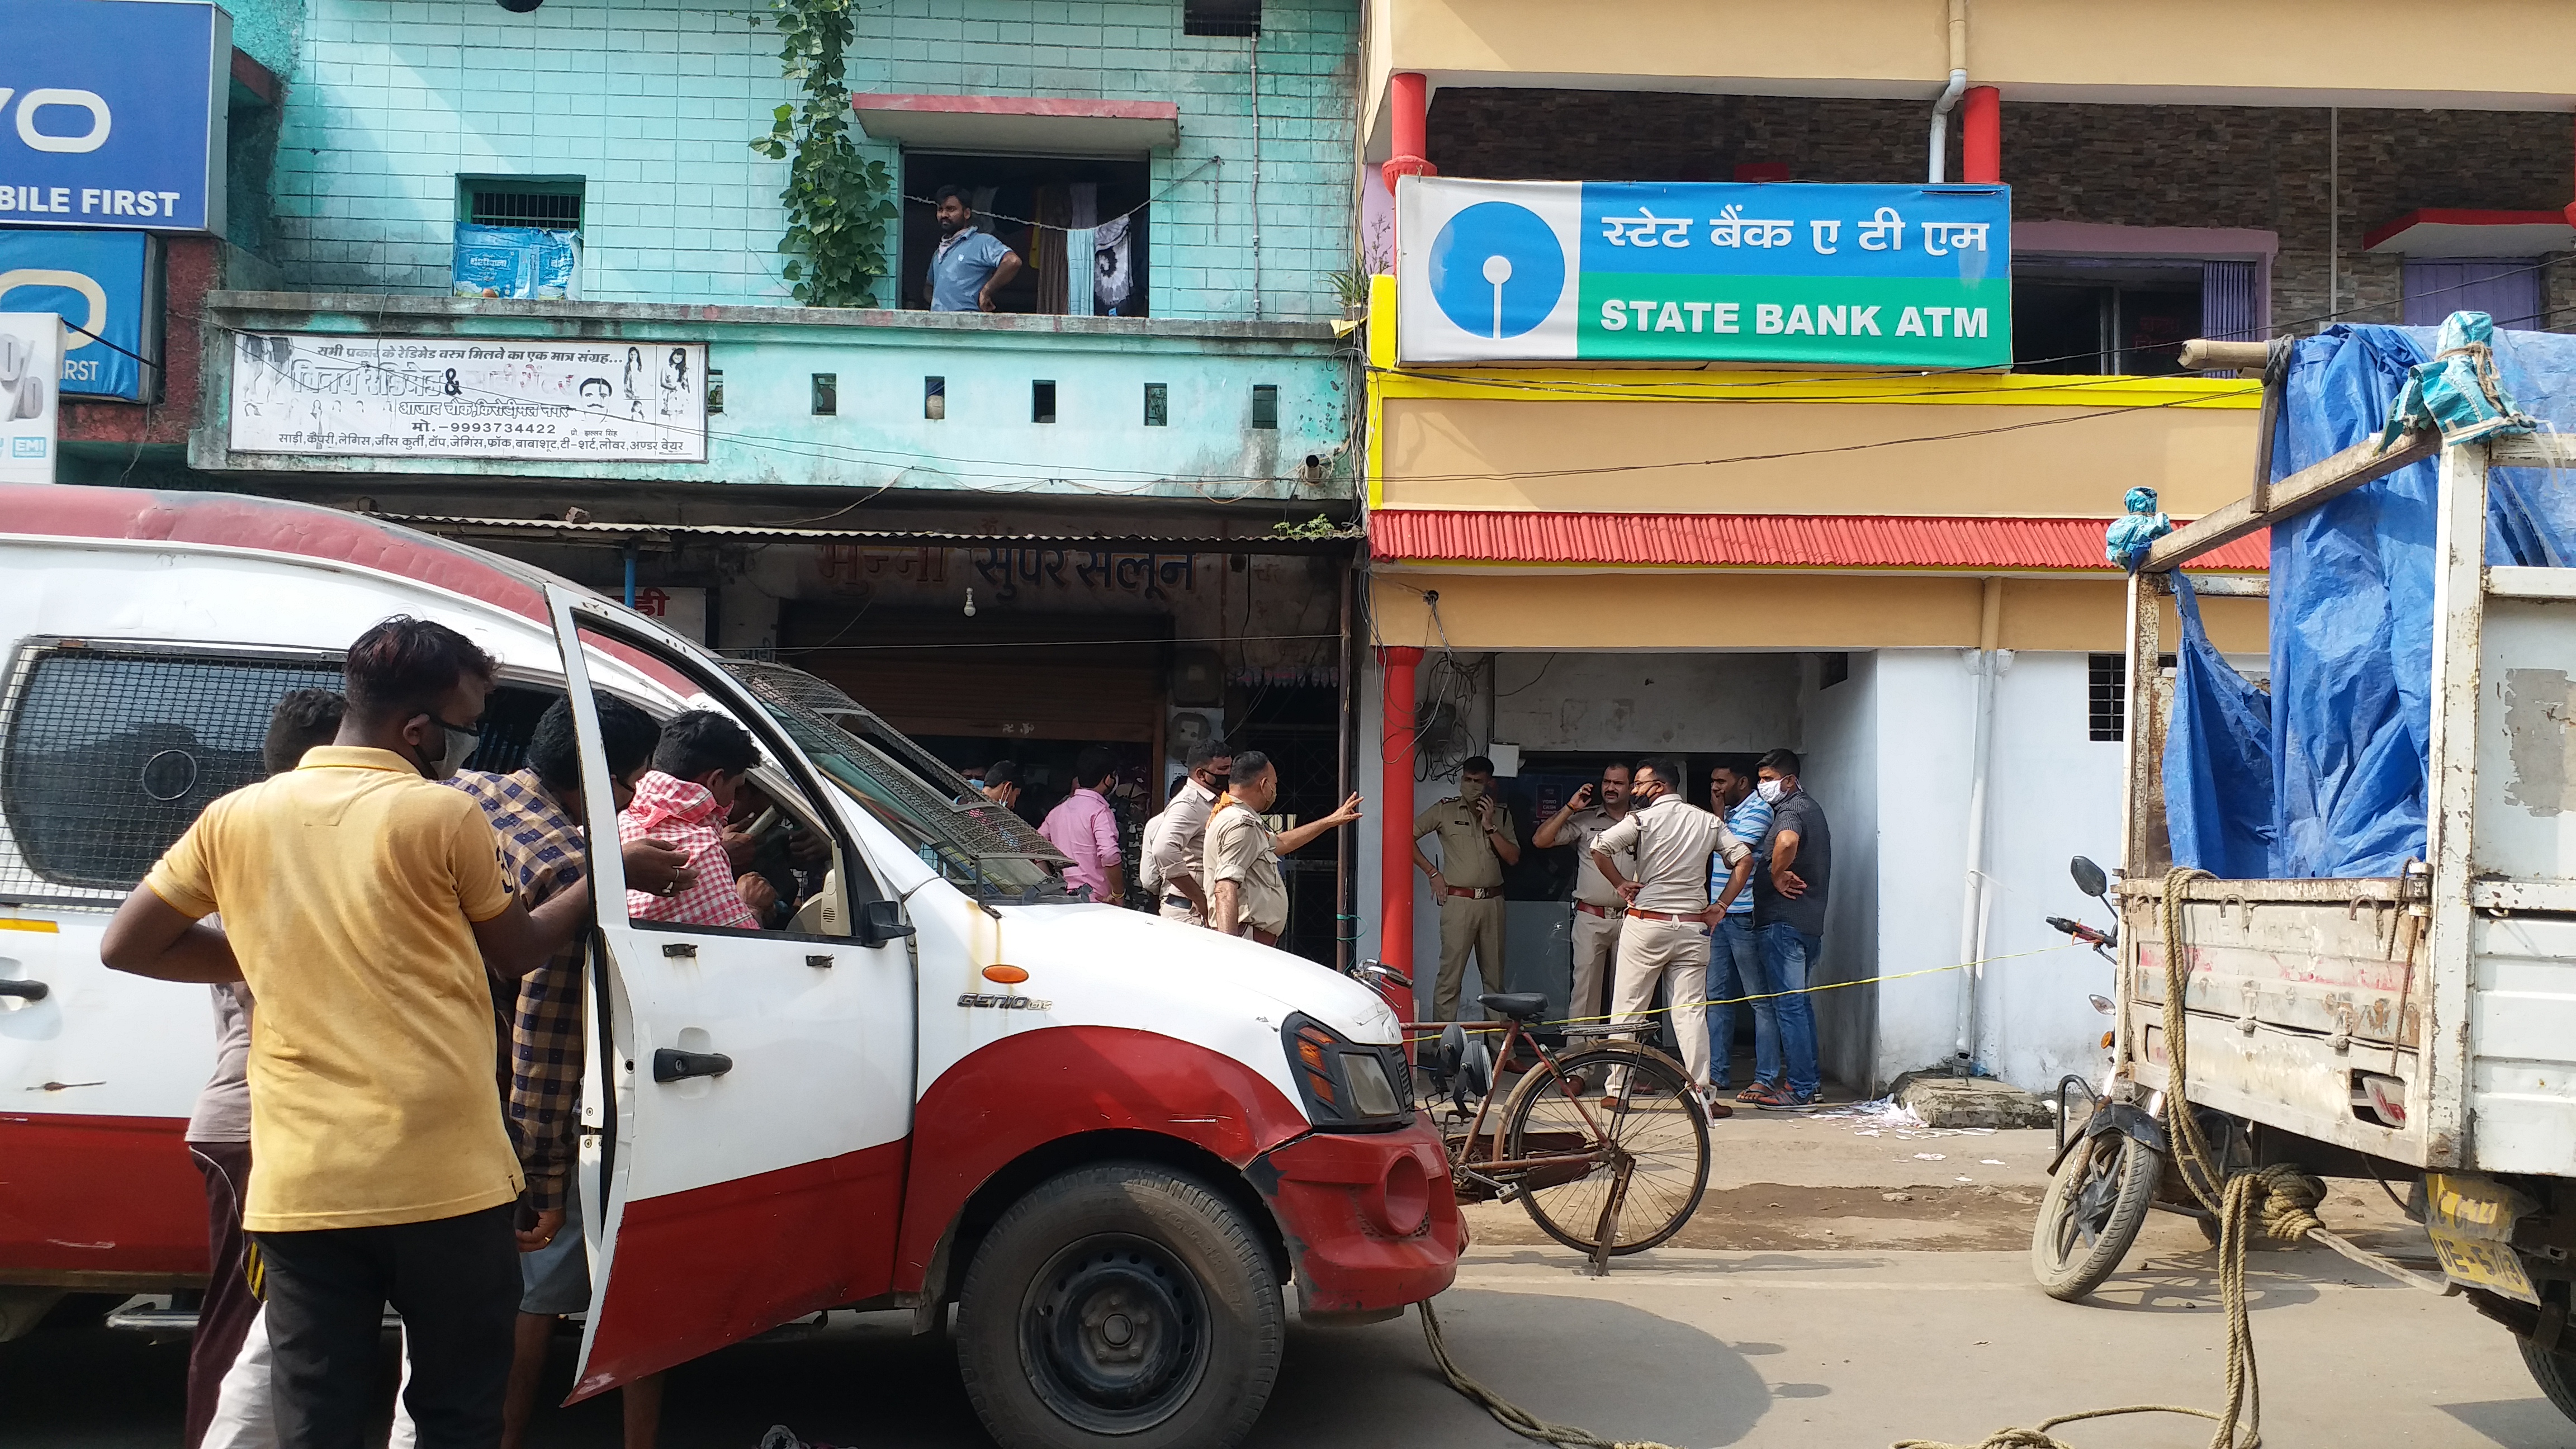 13 lakh robbed from SBI cash van driver shot dead raigarh